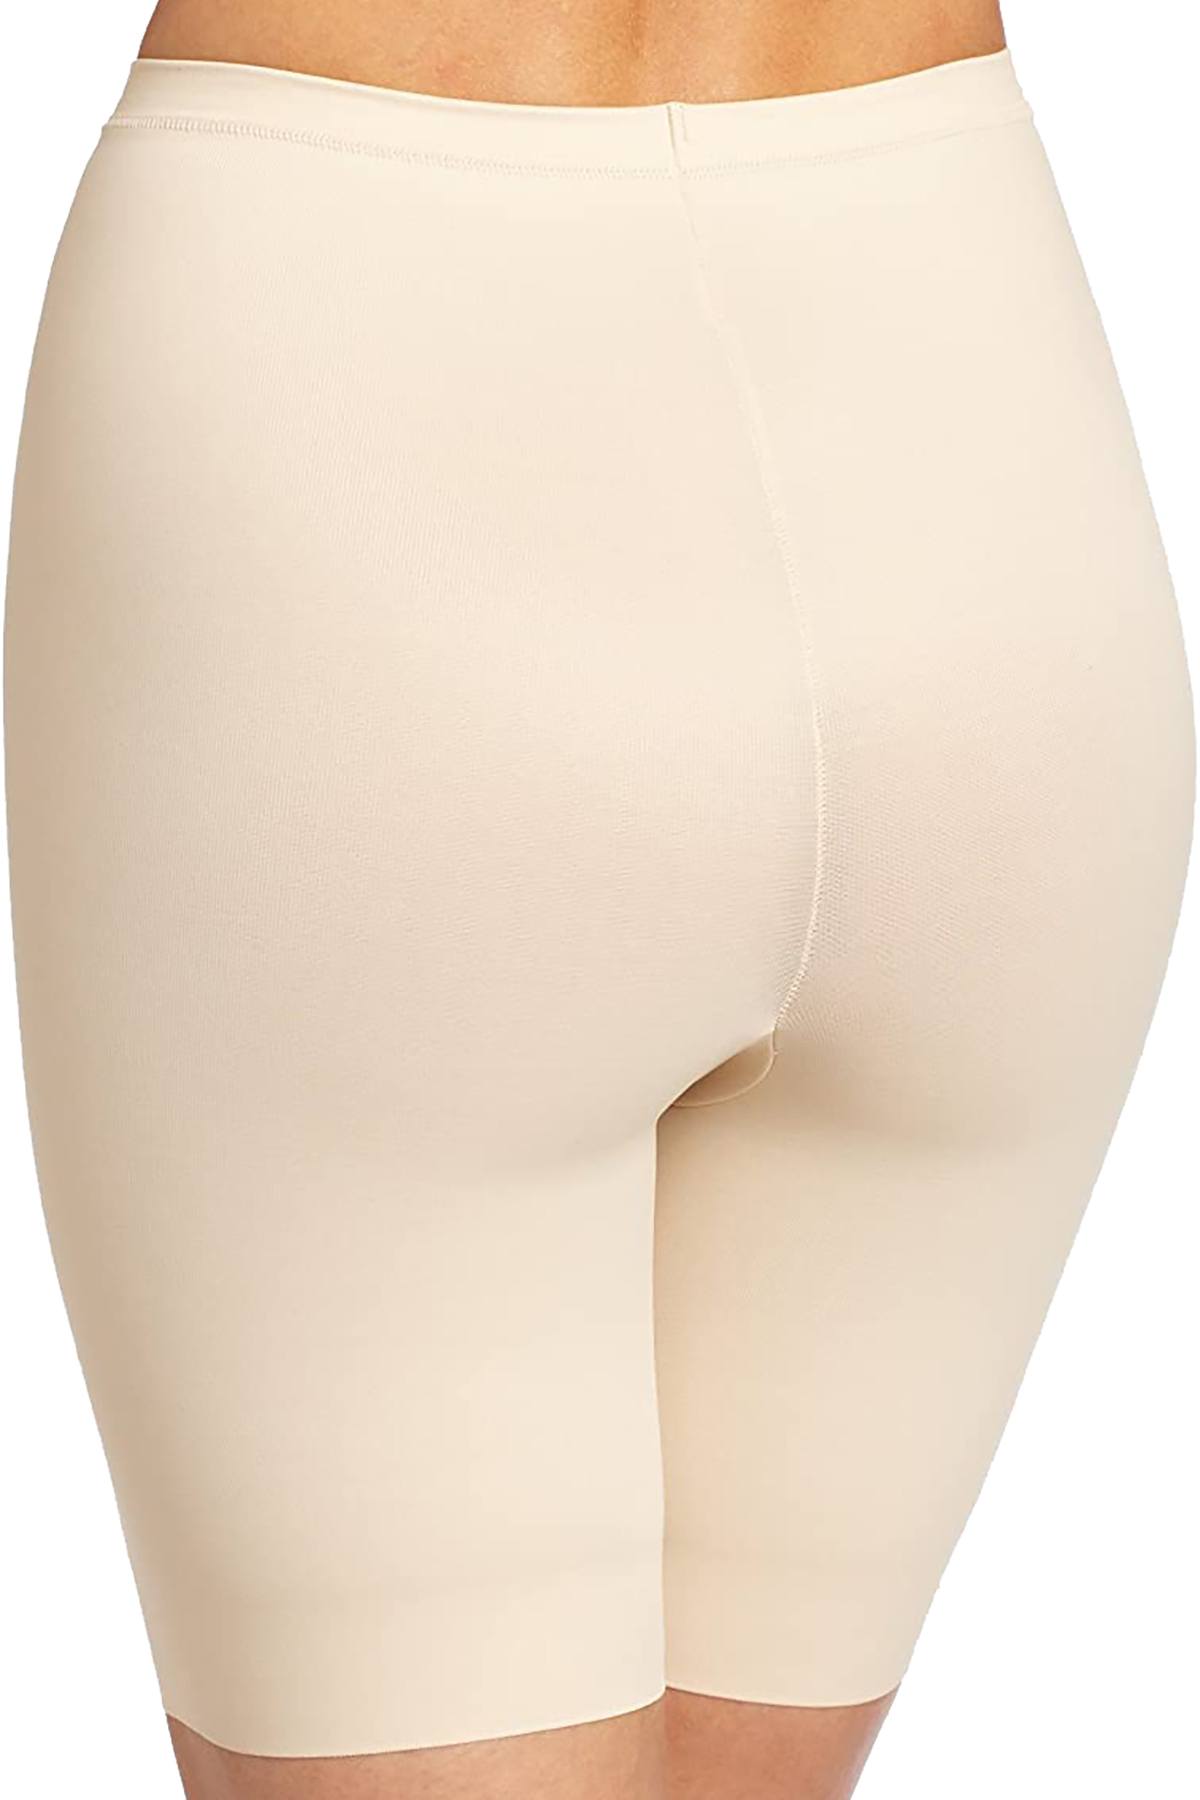 Maidenform Flexees Adjusts To Me Thigh Slimmer in Ivory Nude